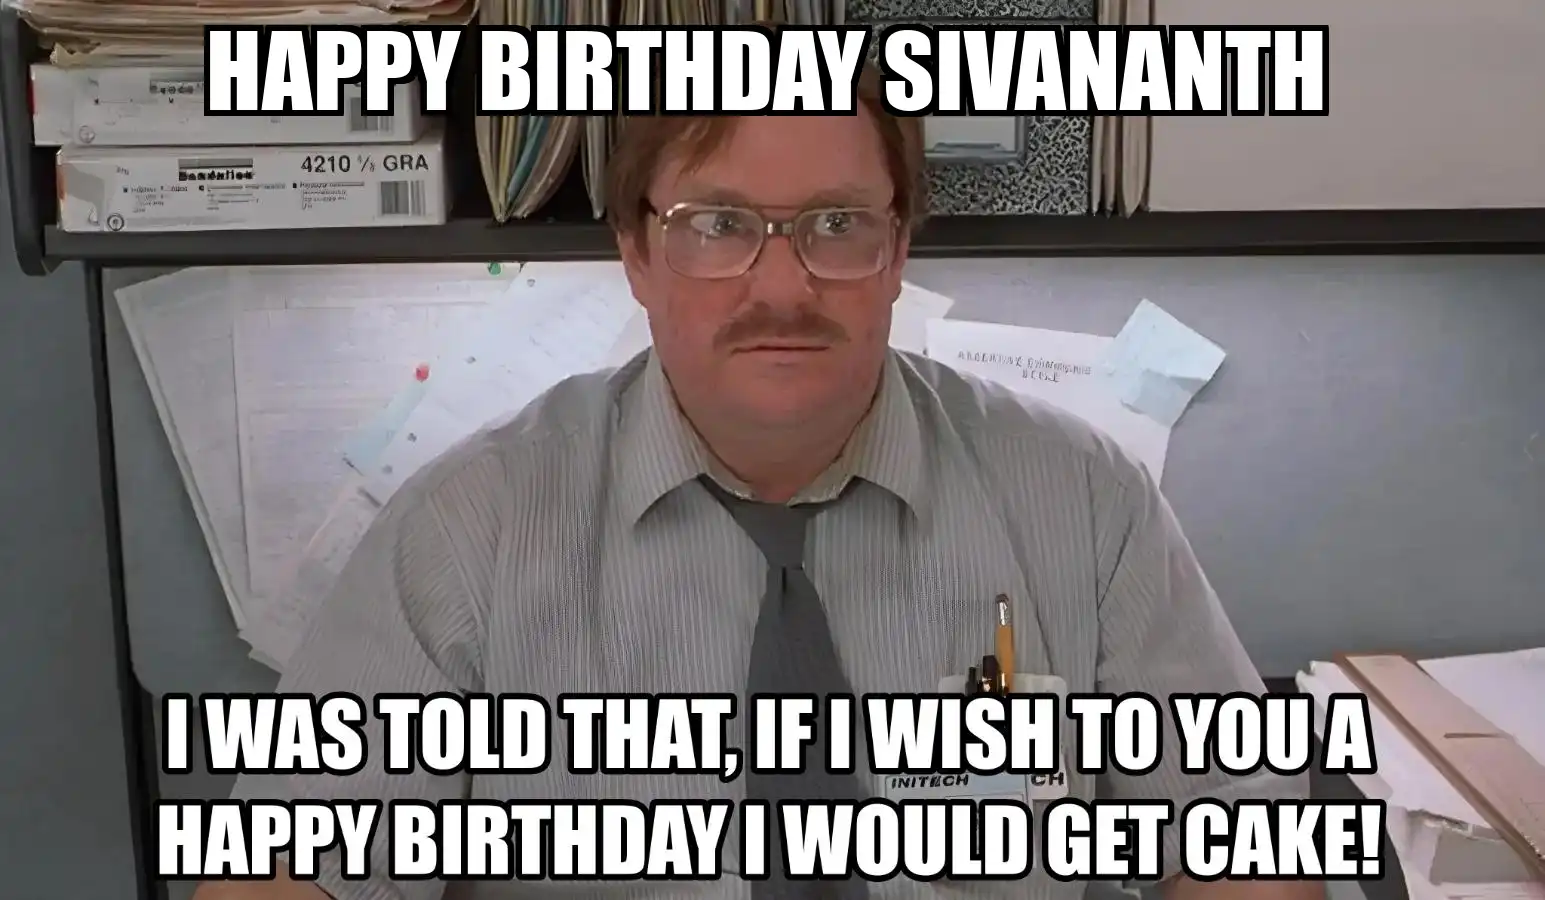 Happy Birthday Sivananth I Would Get A Cake Meme